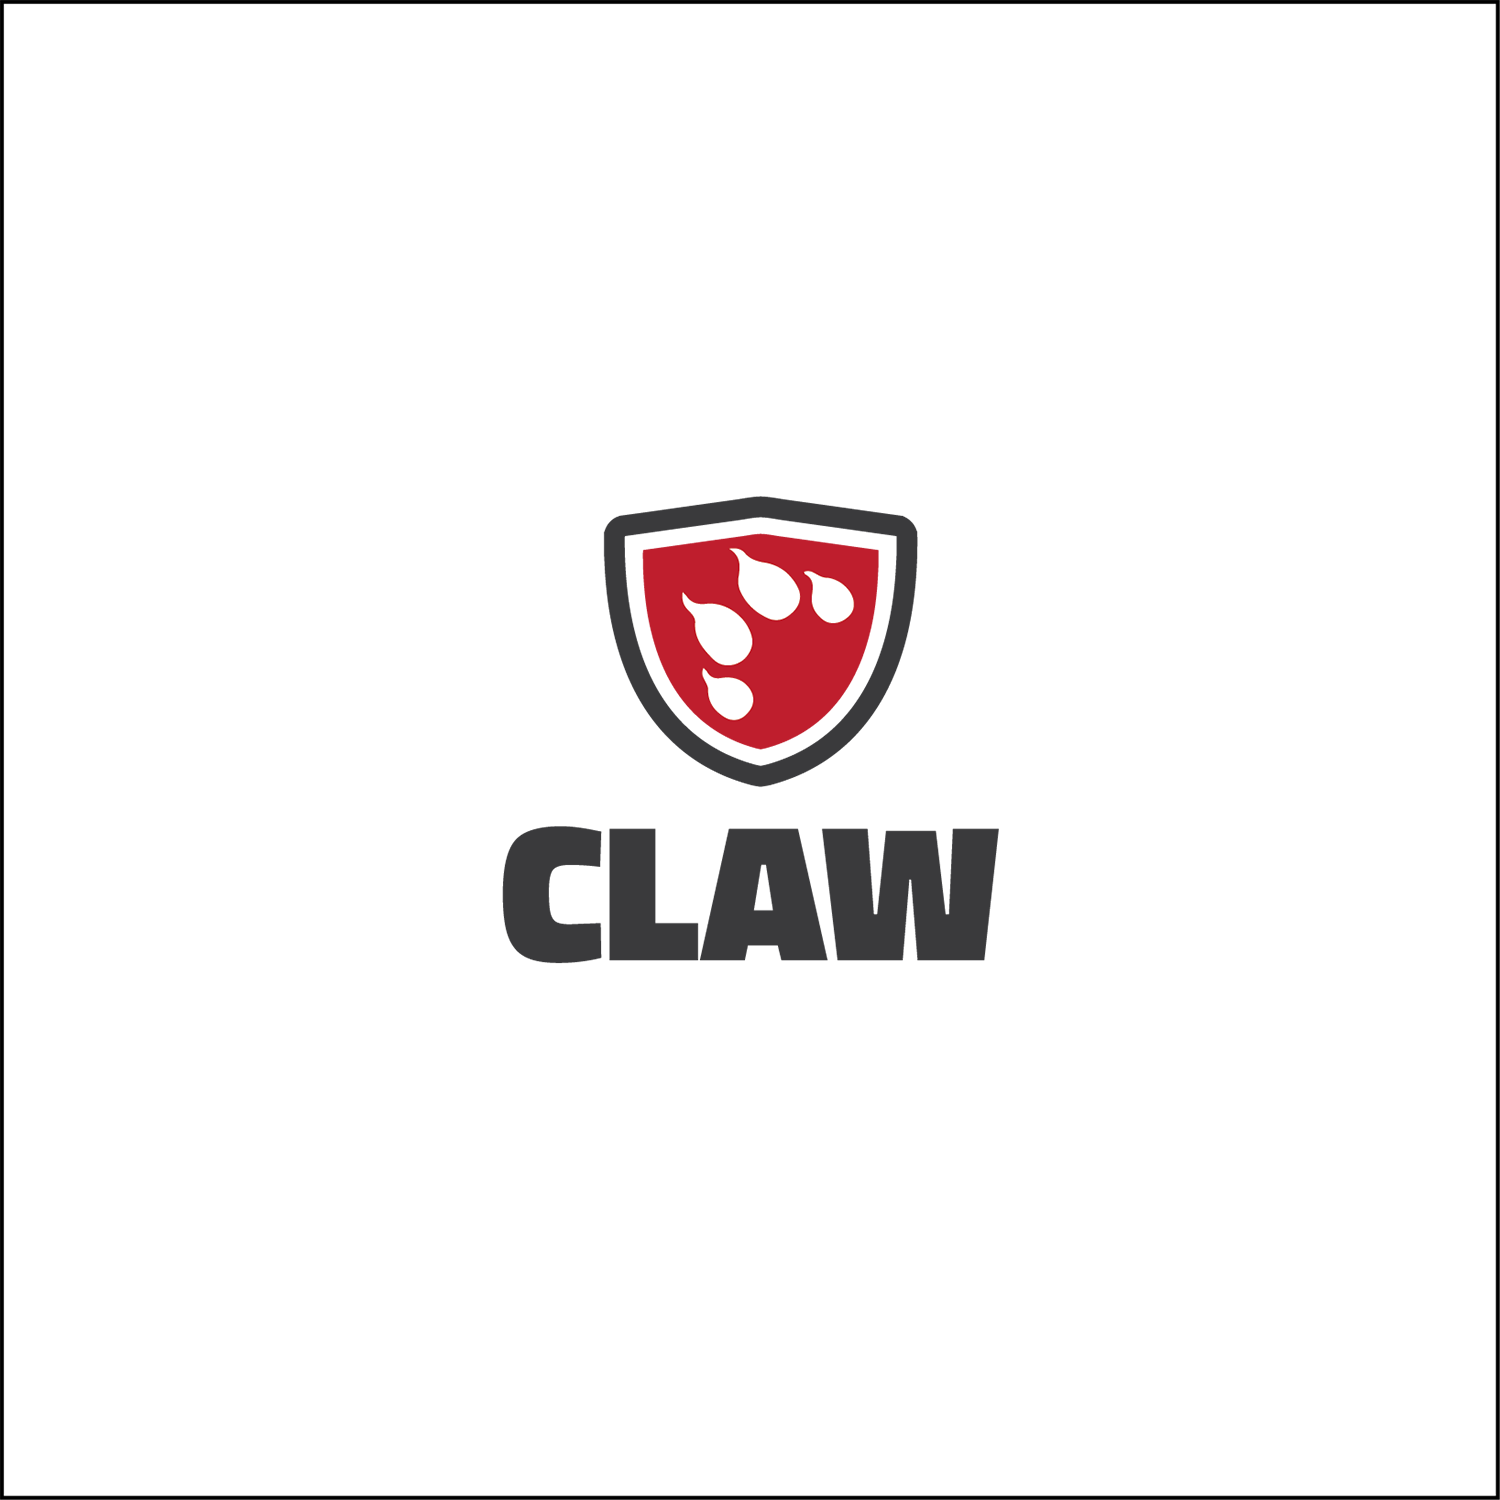 Claw Logo - Professional, Masculine Logo Design for The logo can have the name